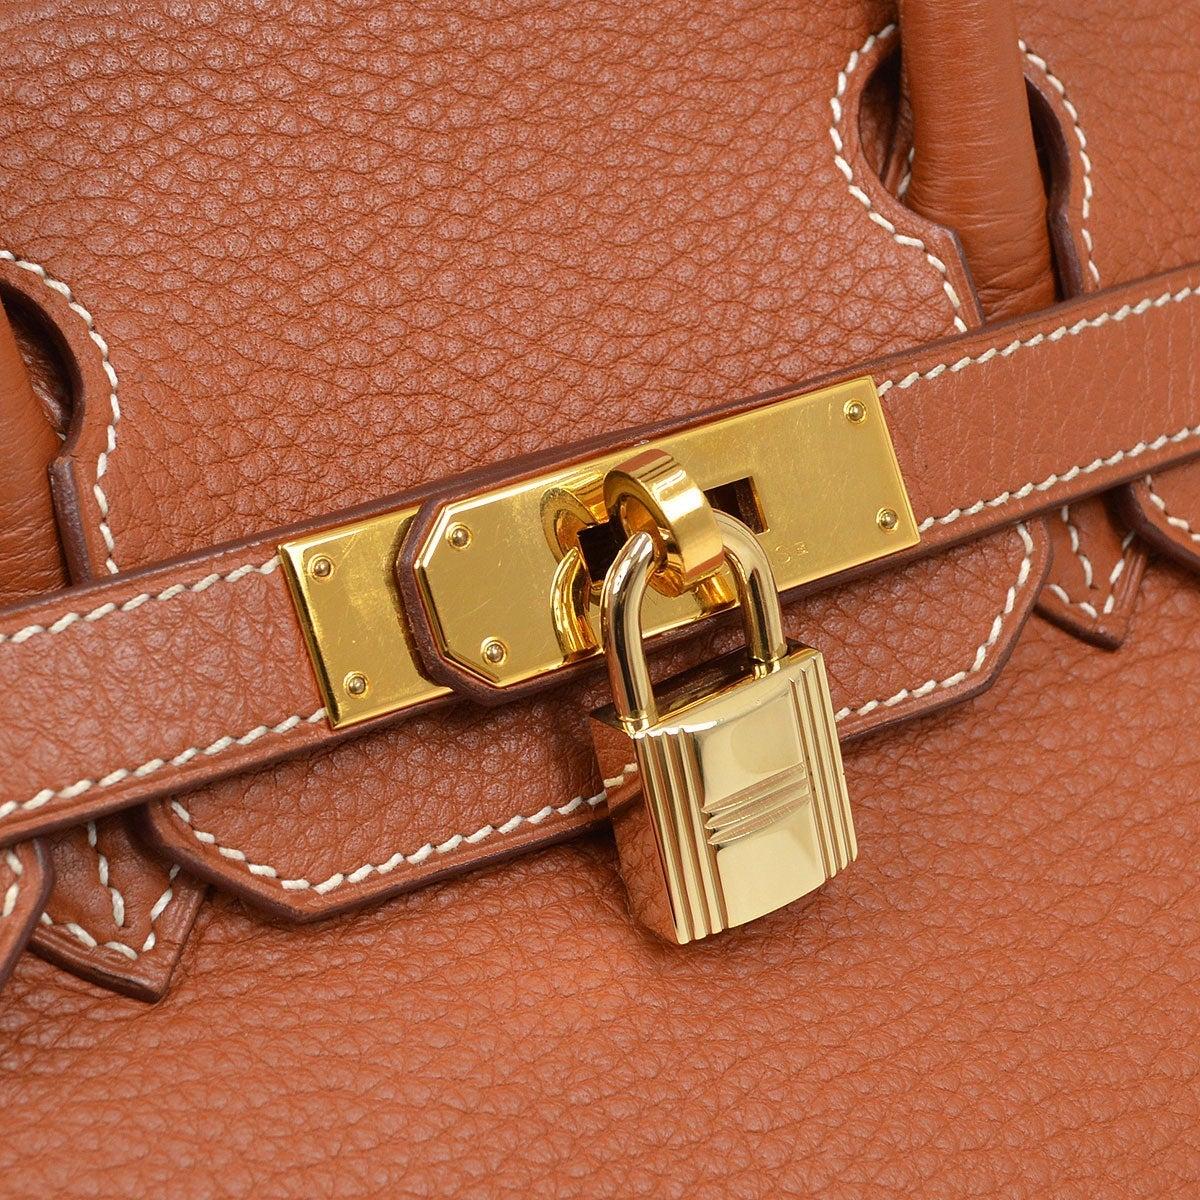 Pre-Owned Vintage Condition
From 2005 Collection
Taurillon Clemence Leather
Gold Tone Hardware
Leather Lining
Measures 11.75